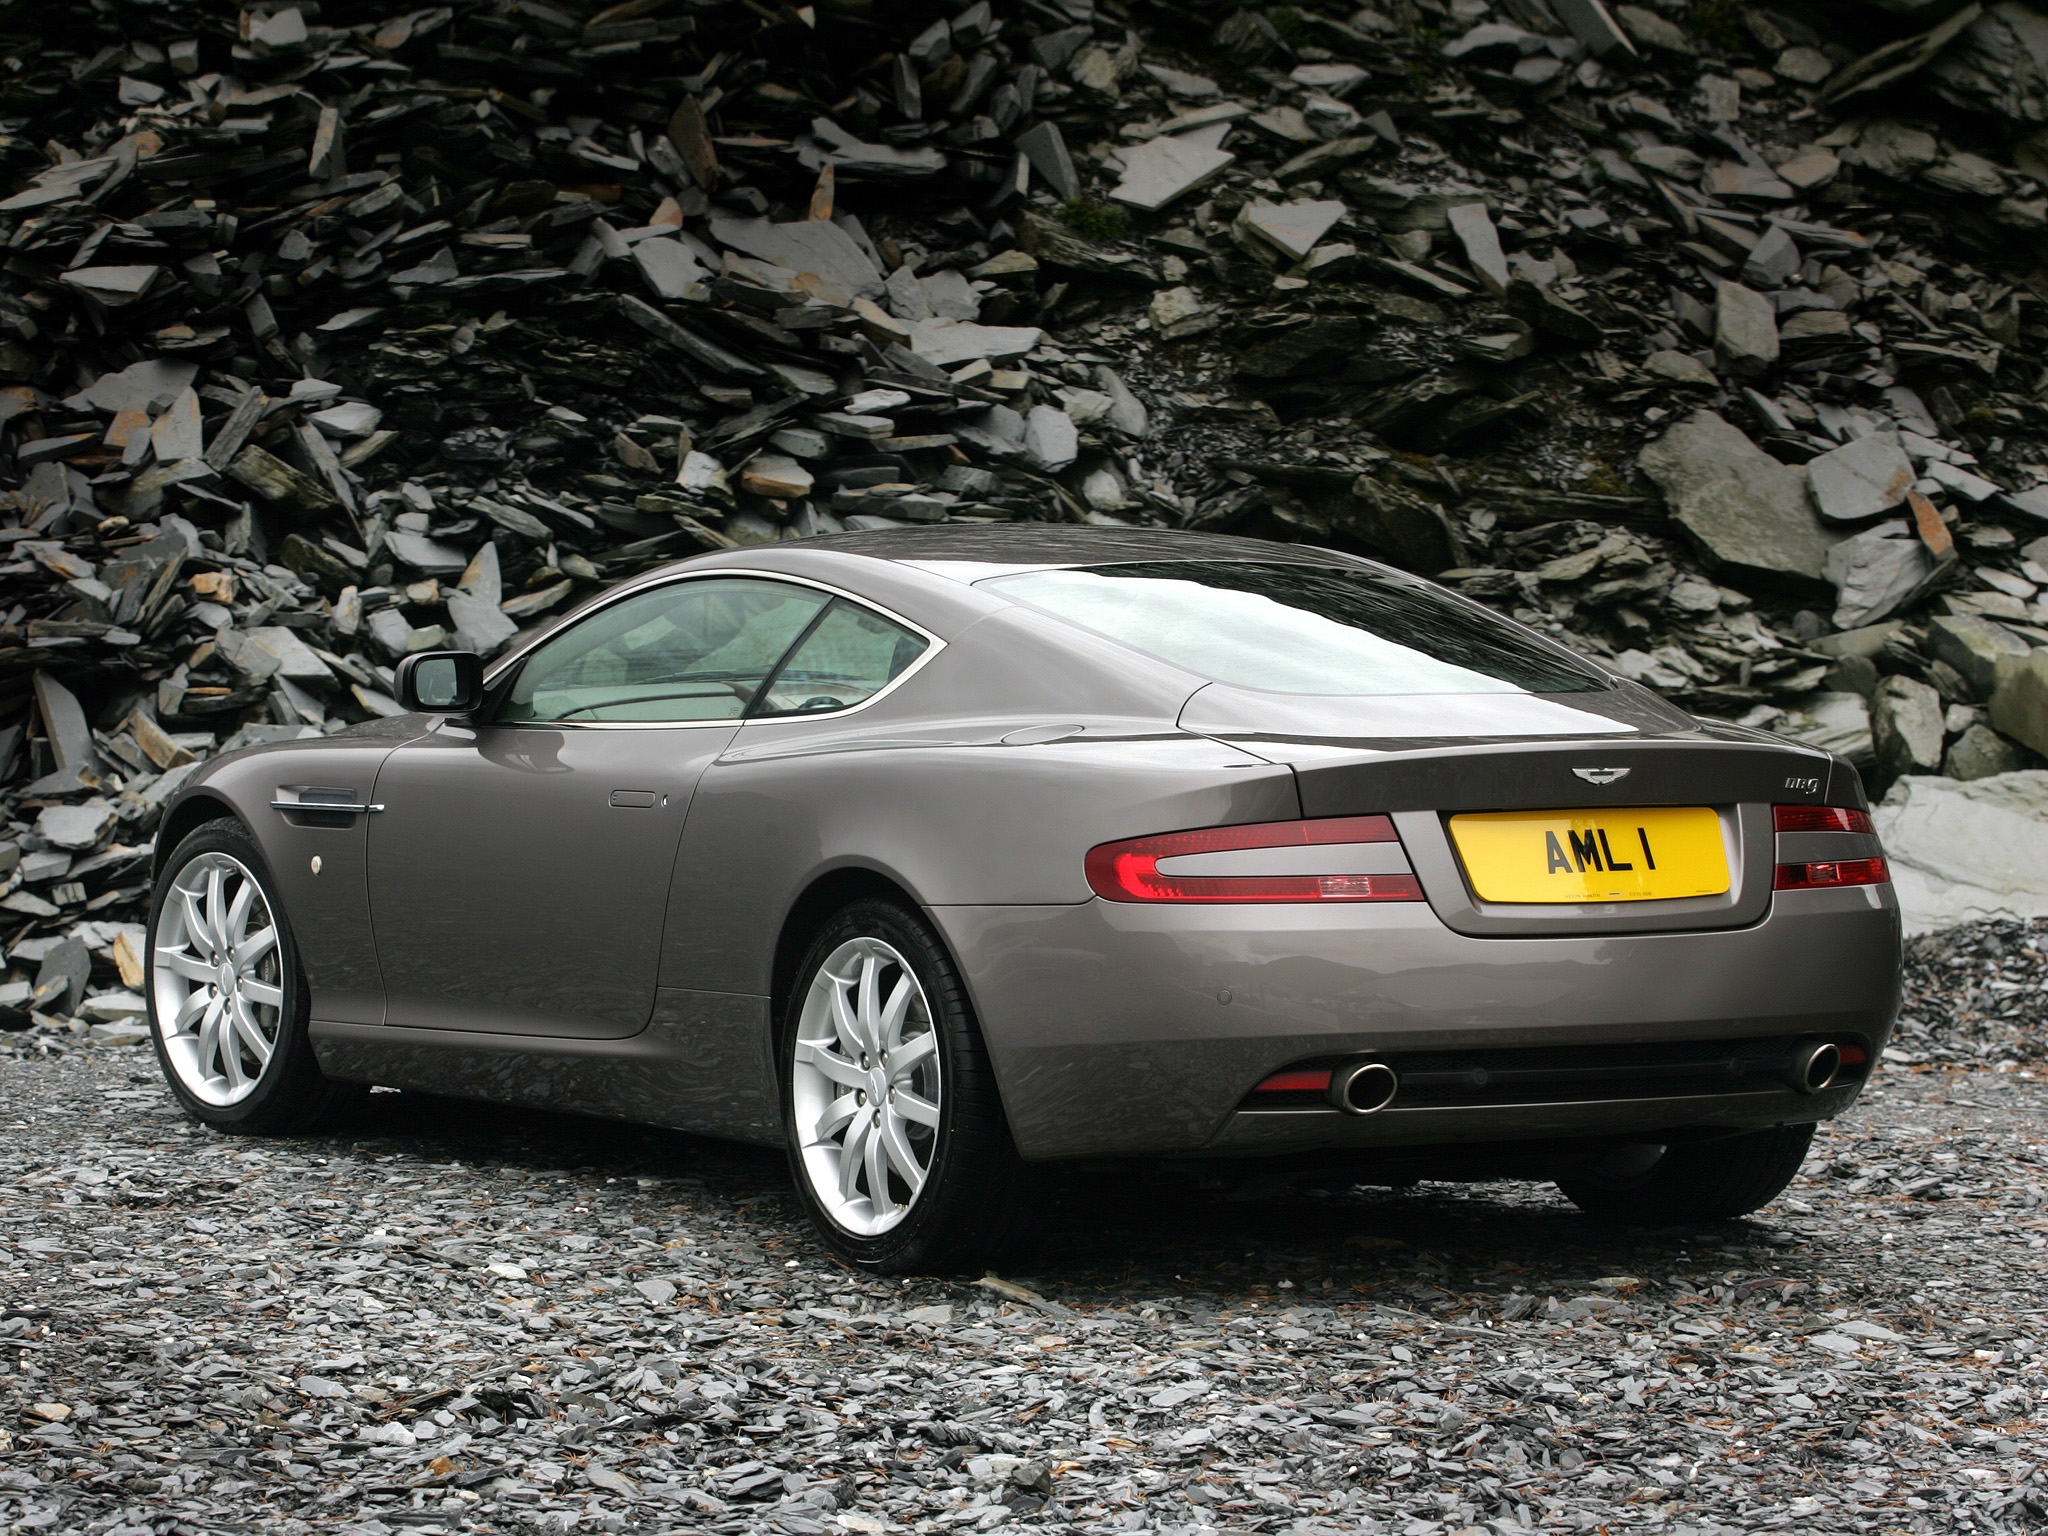 cars, auto, aston martin, grey, back view, rear view, style, 2004, db9